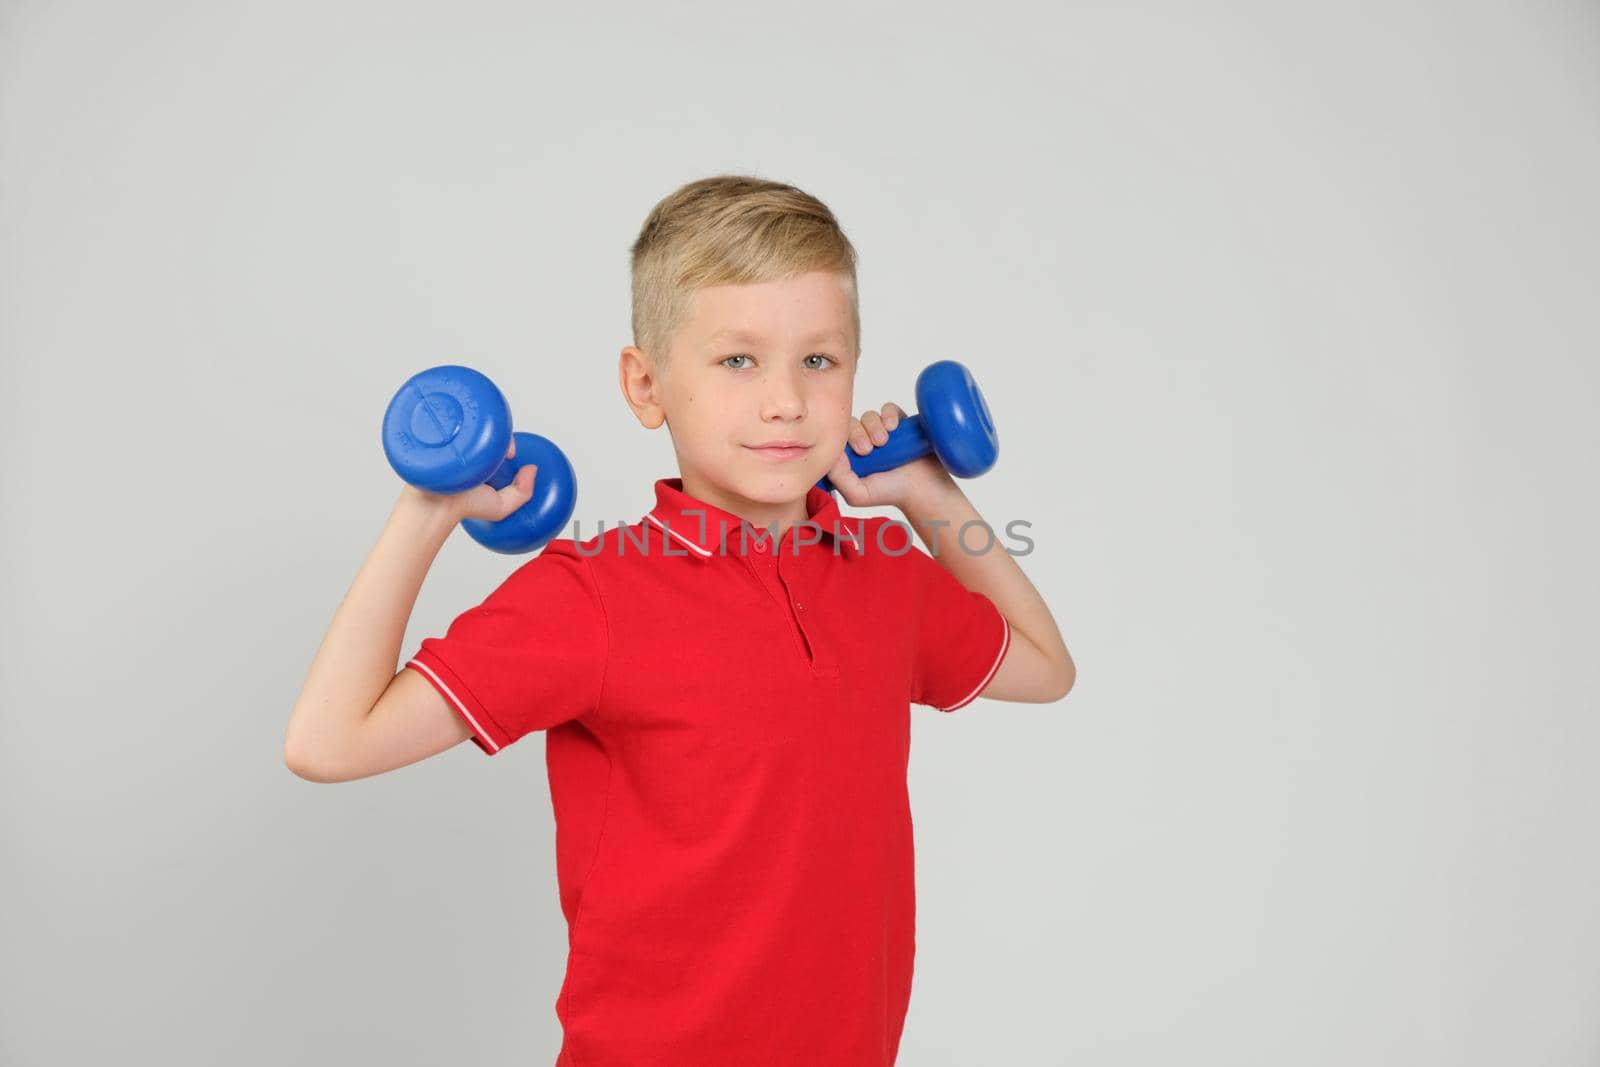 The little boy is engaged in fitness, he lifts dumbbells in the gym. The concept of a happy childhood, the development of children's sports. Isolated on white background.